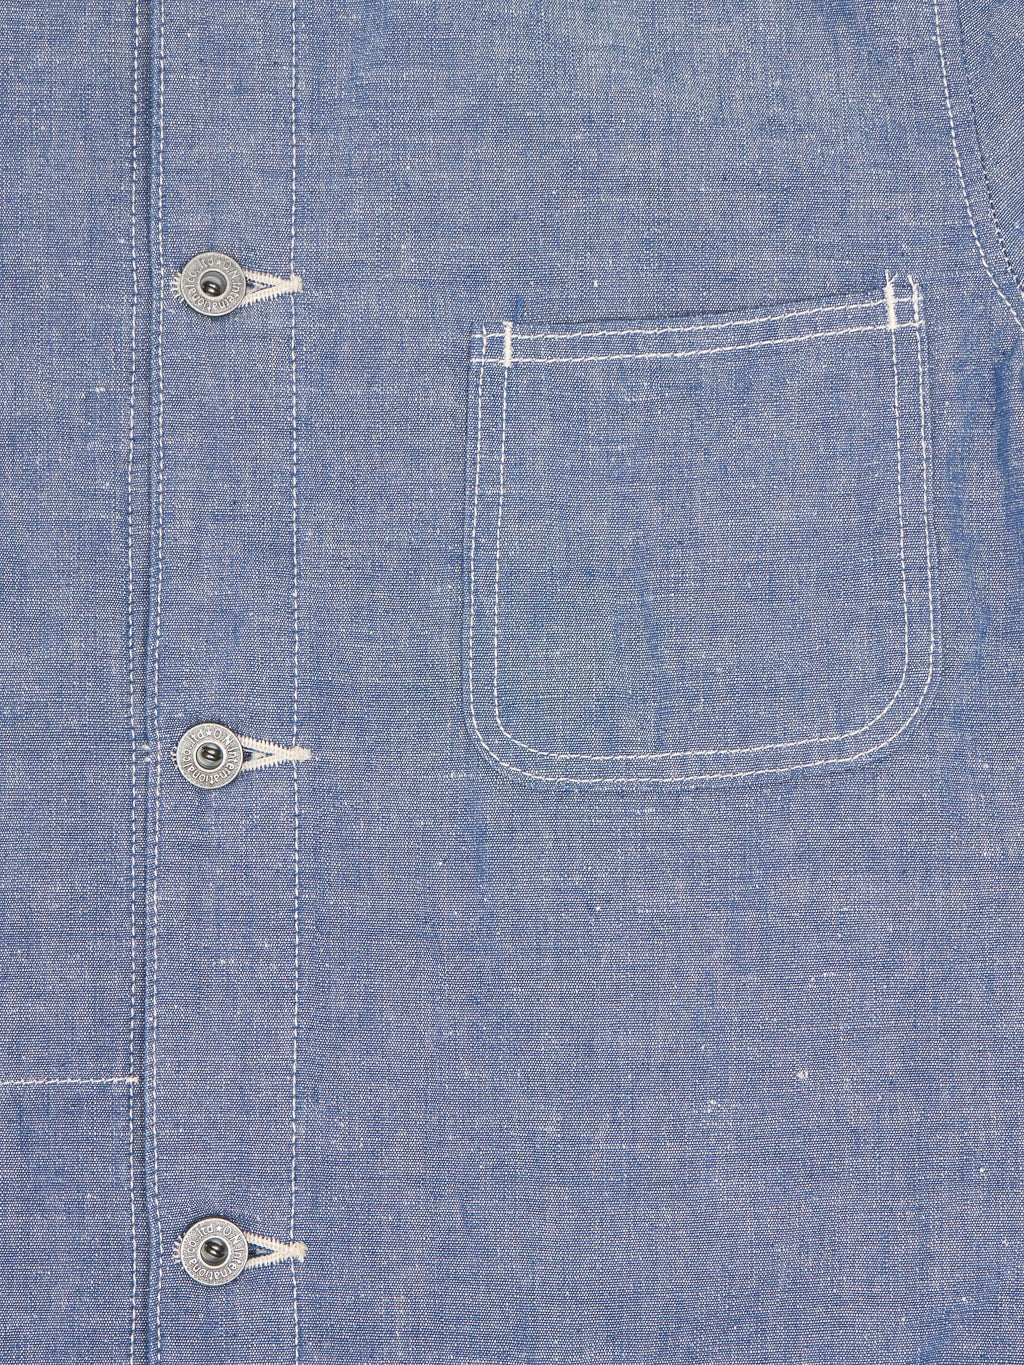 Oni denim heavy chambray blue gray coverall buttons detail